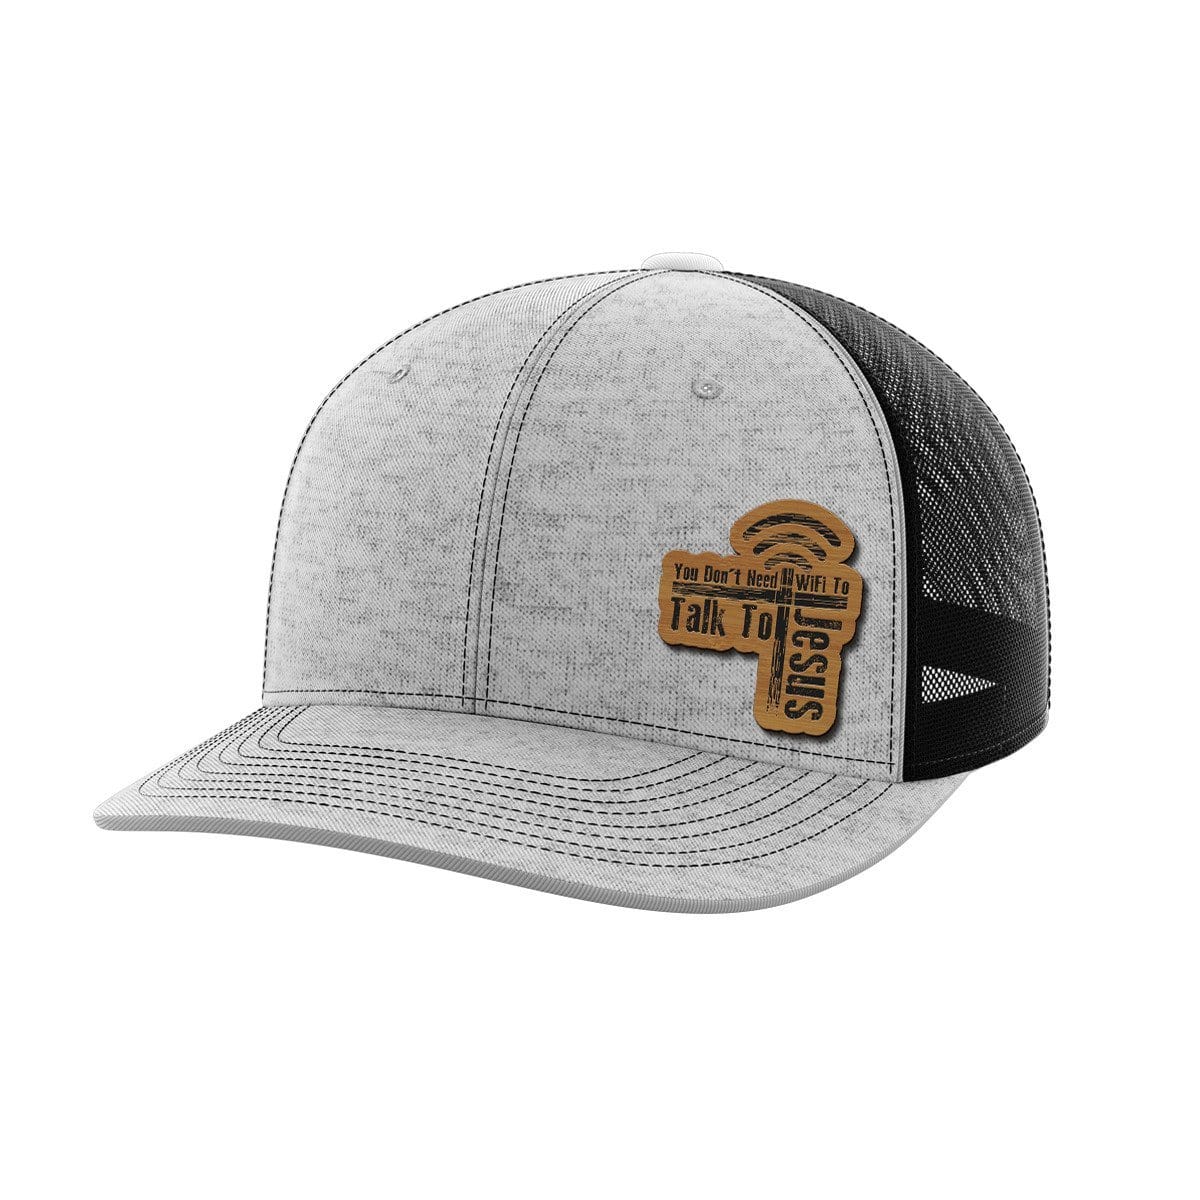 You Don't Need Wifi Bamboo Patch Hat - Greater Half